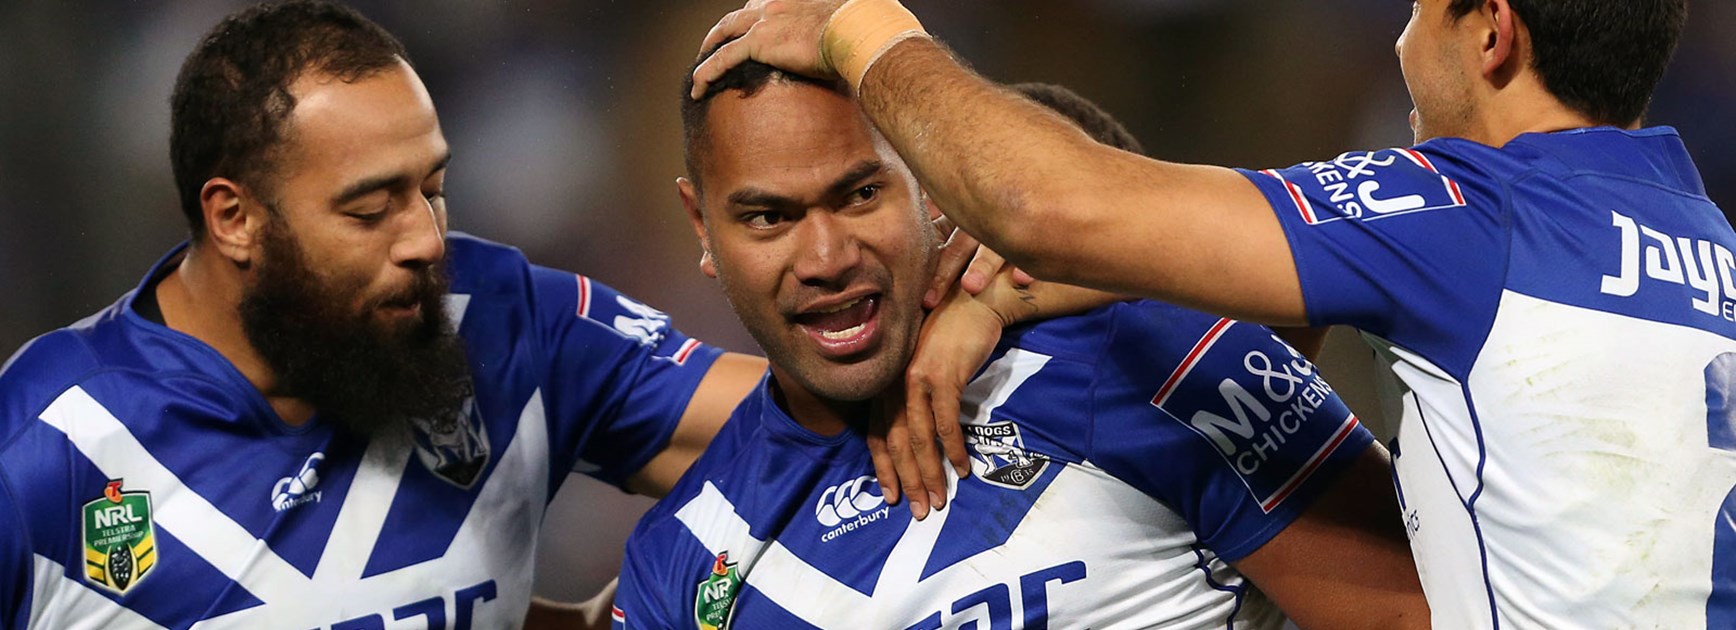 Tony Williams scored a try as the Bulldogs downed the Broncos in Round 16.